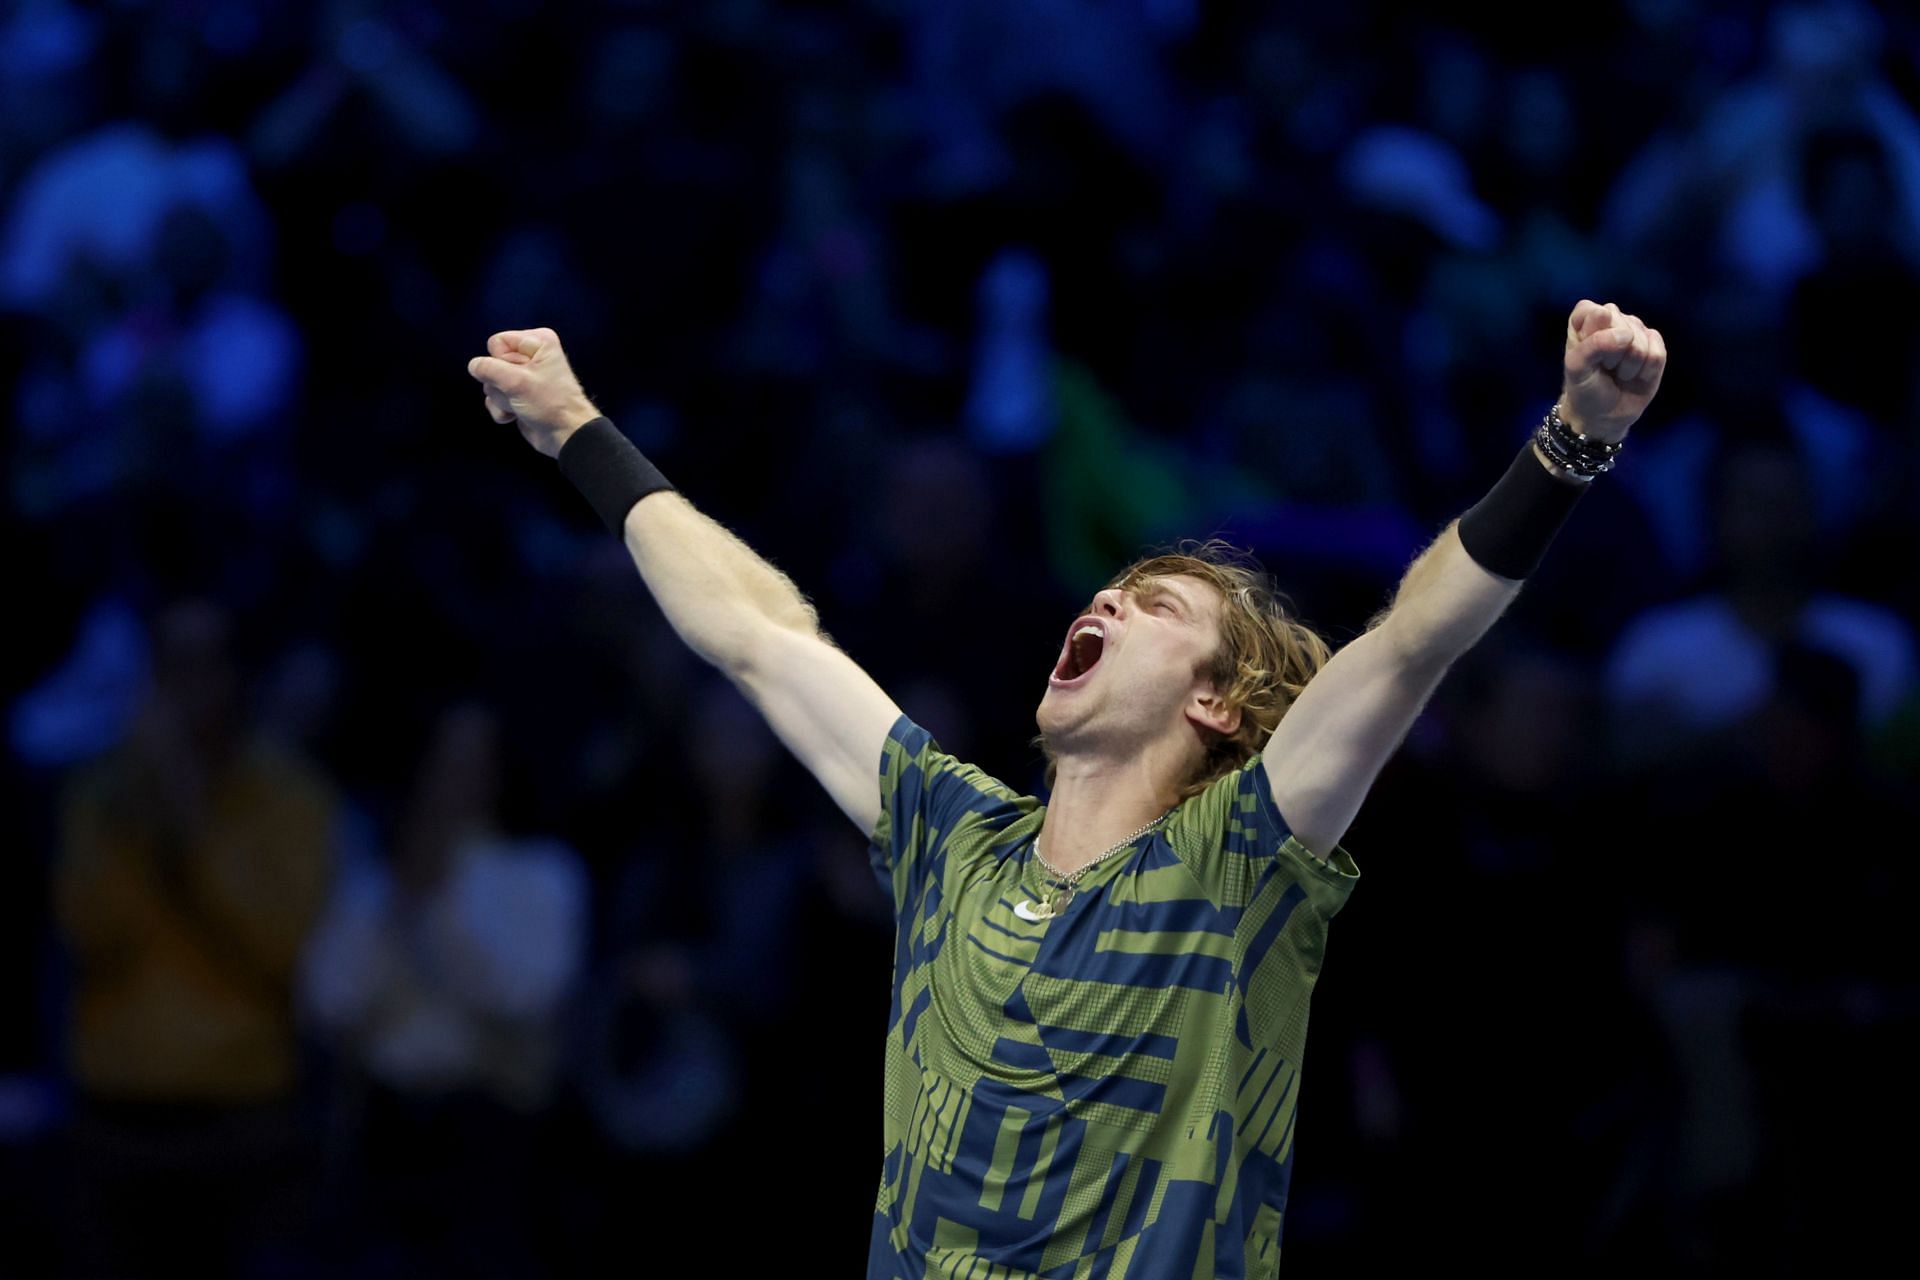 Andrey Rublev celebrates his win against Stefanos Tsitsipas at the 2022 Nitto ATP Finals.